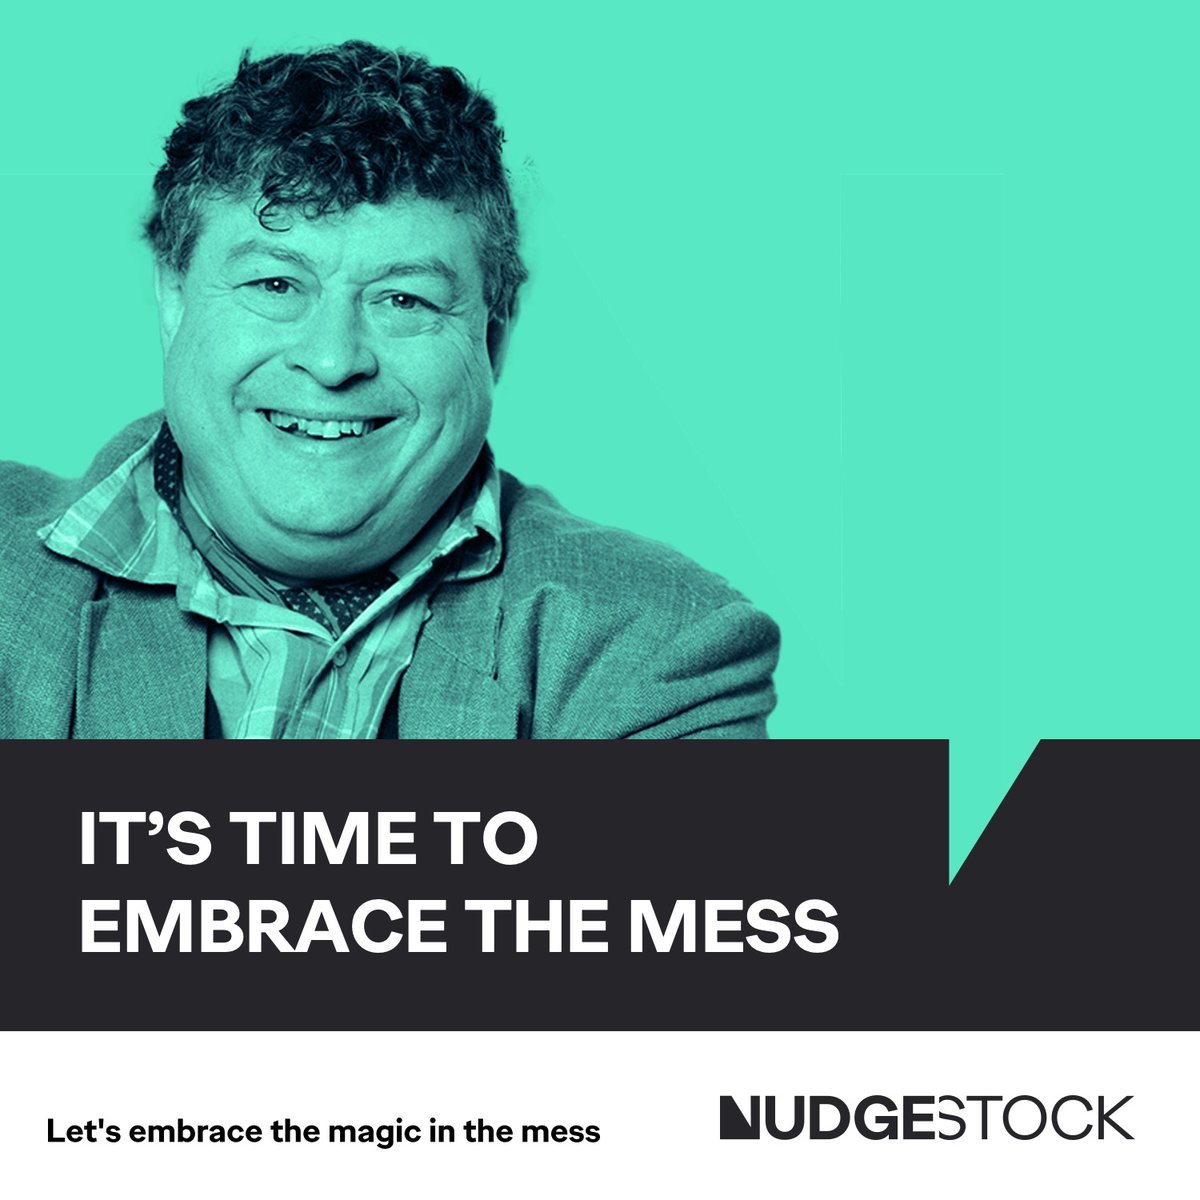 We're kicking off with @rorysutherland sharing some of his invaluable Behavioural Science expertise on how businesses in this uncertain world can start 'embracing the mess'. #Nudgestock2023